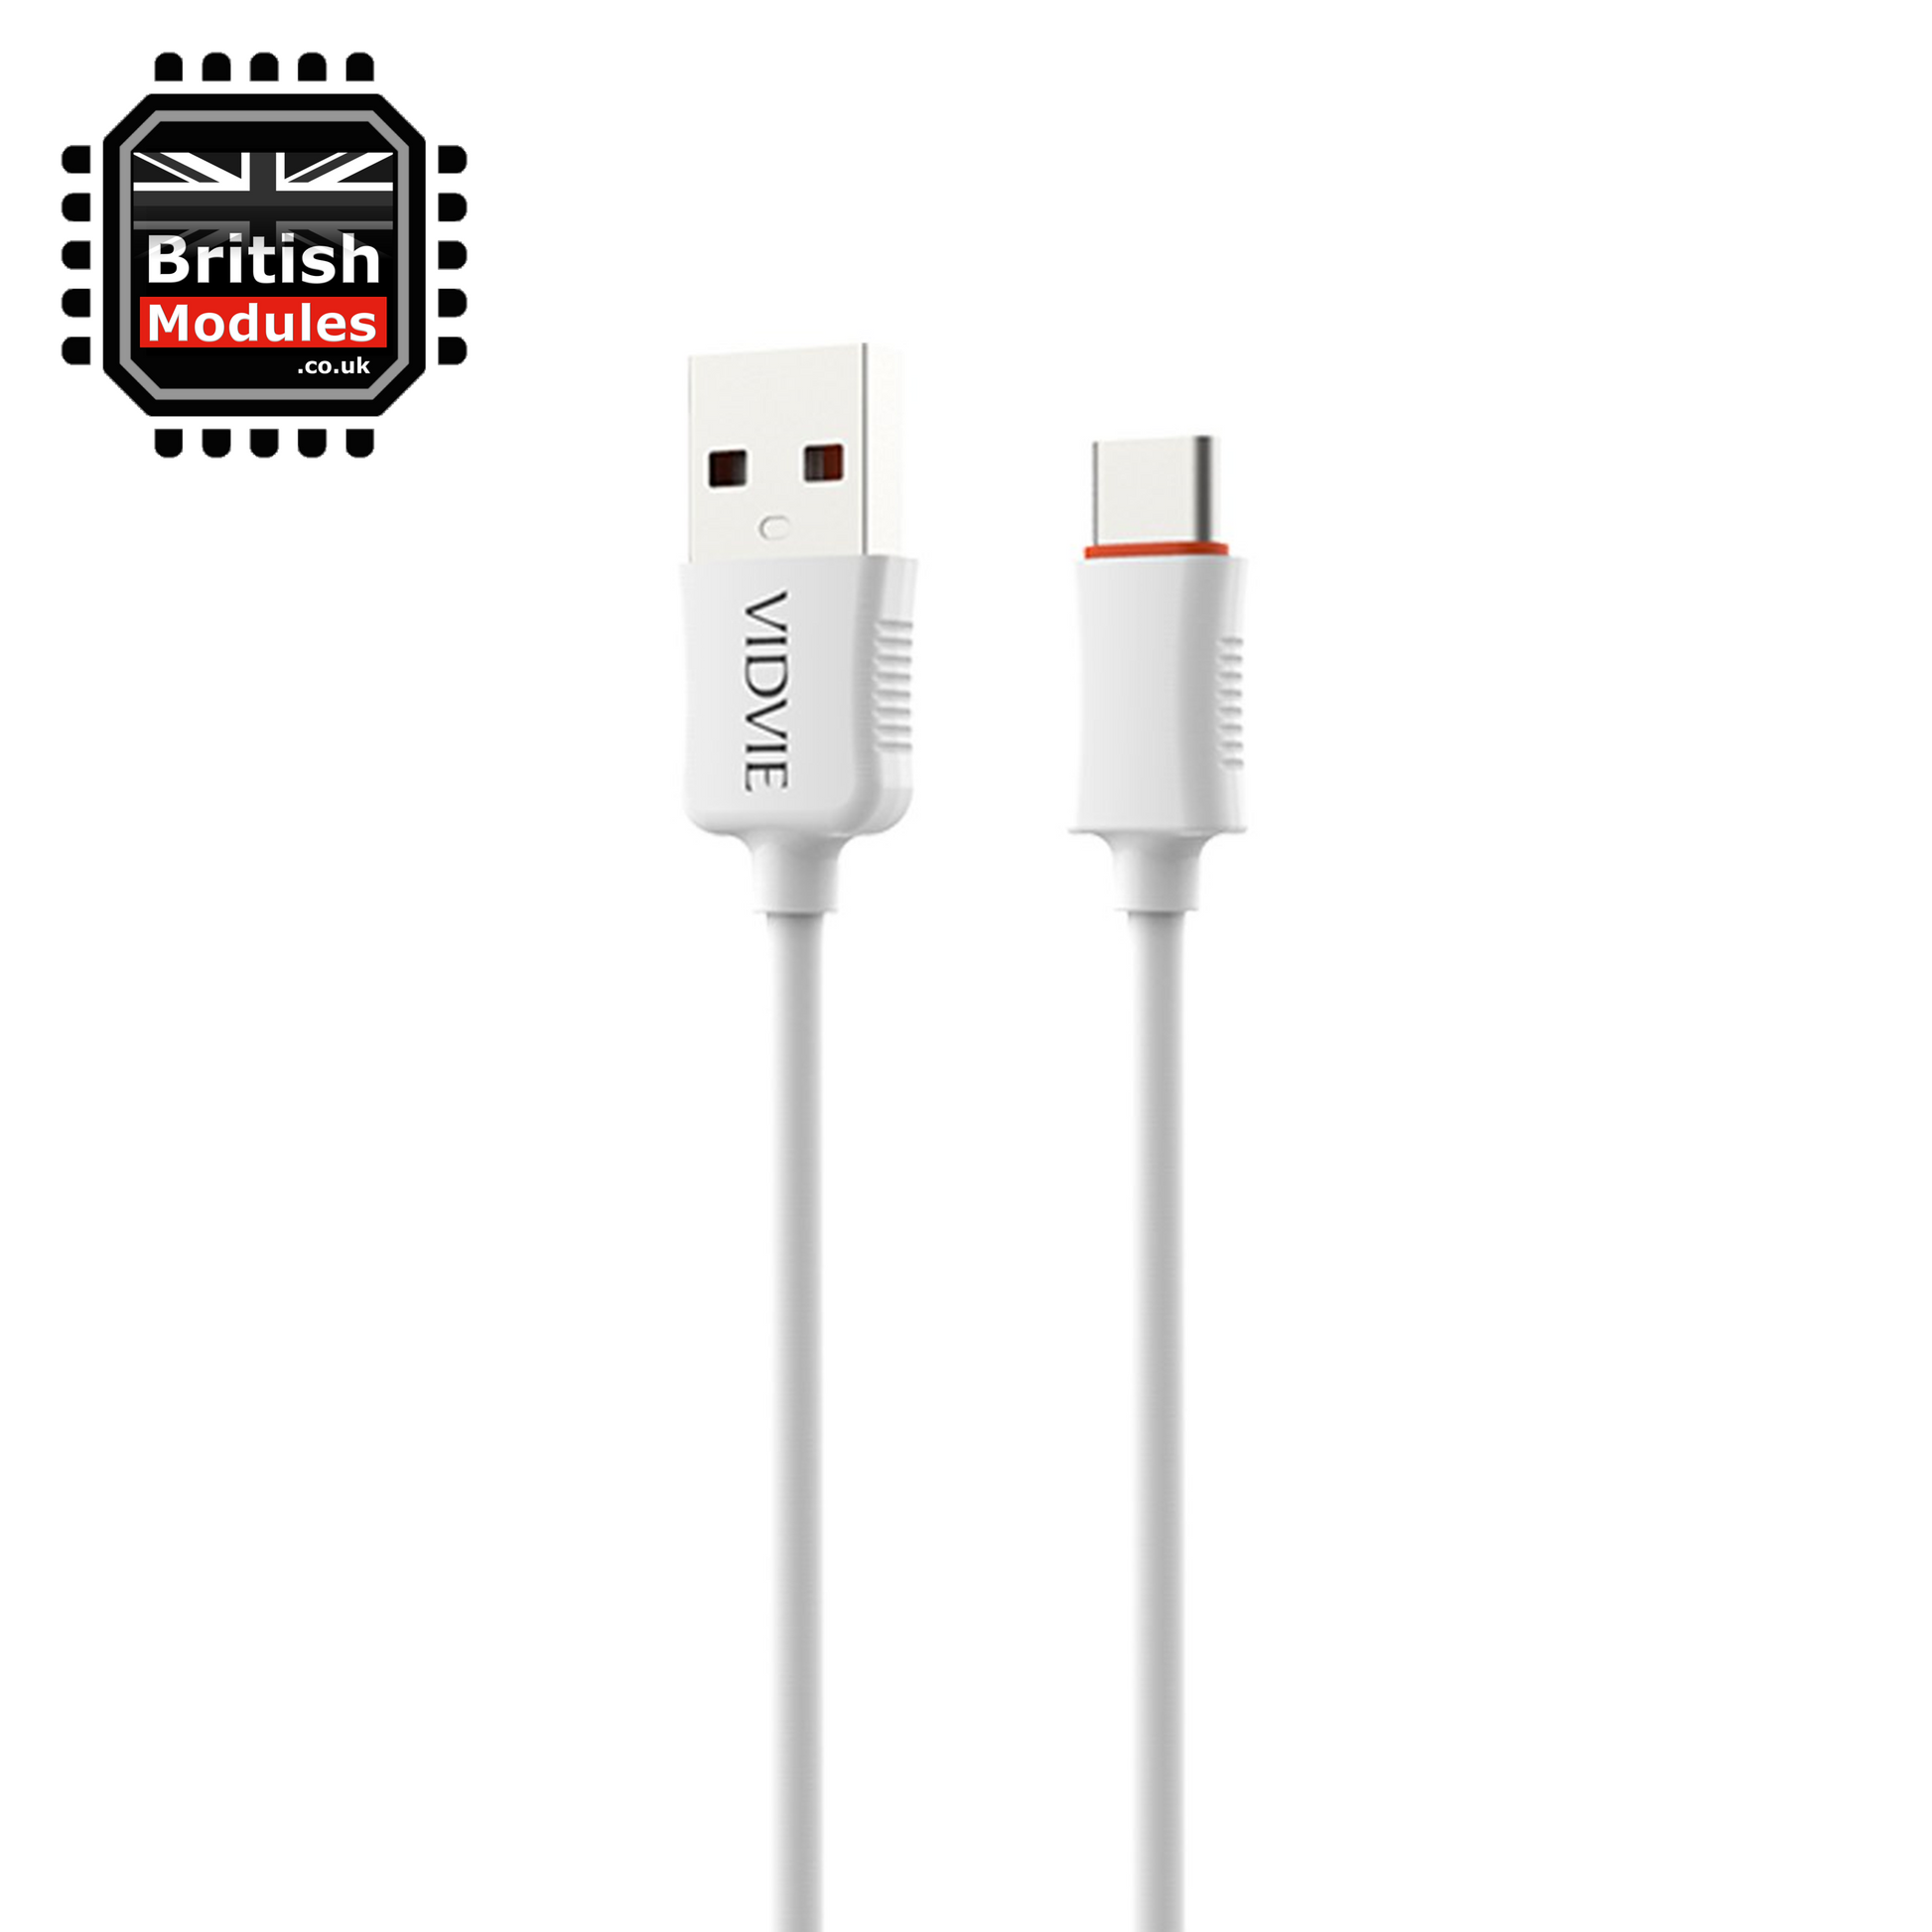 Charging Cable Type C C White 3m, Usb C Cable 3m Fast Charge